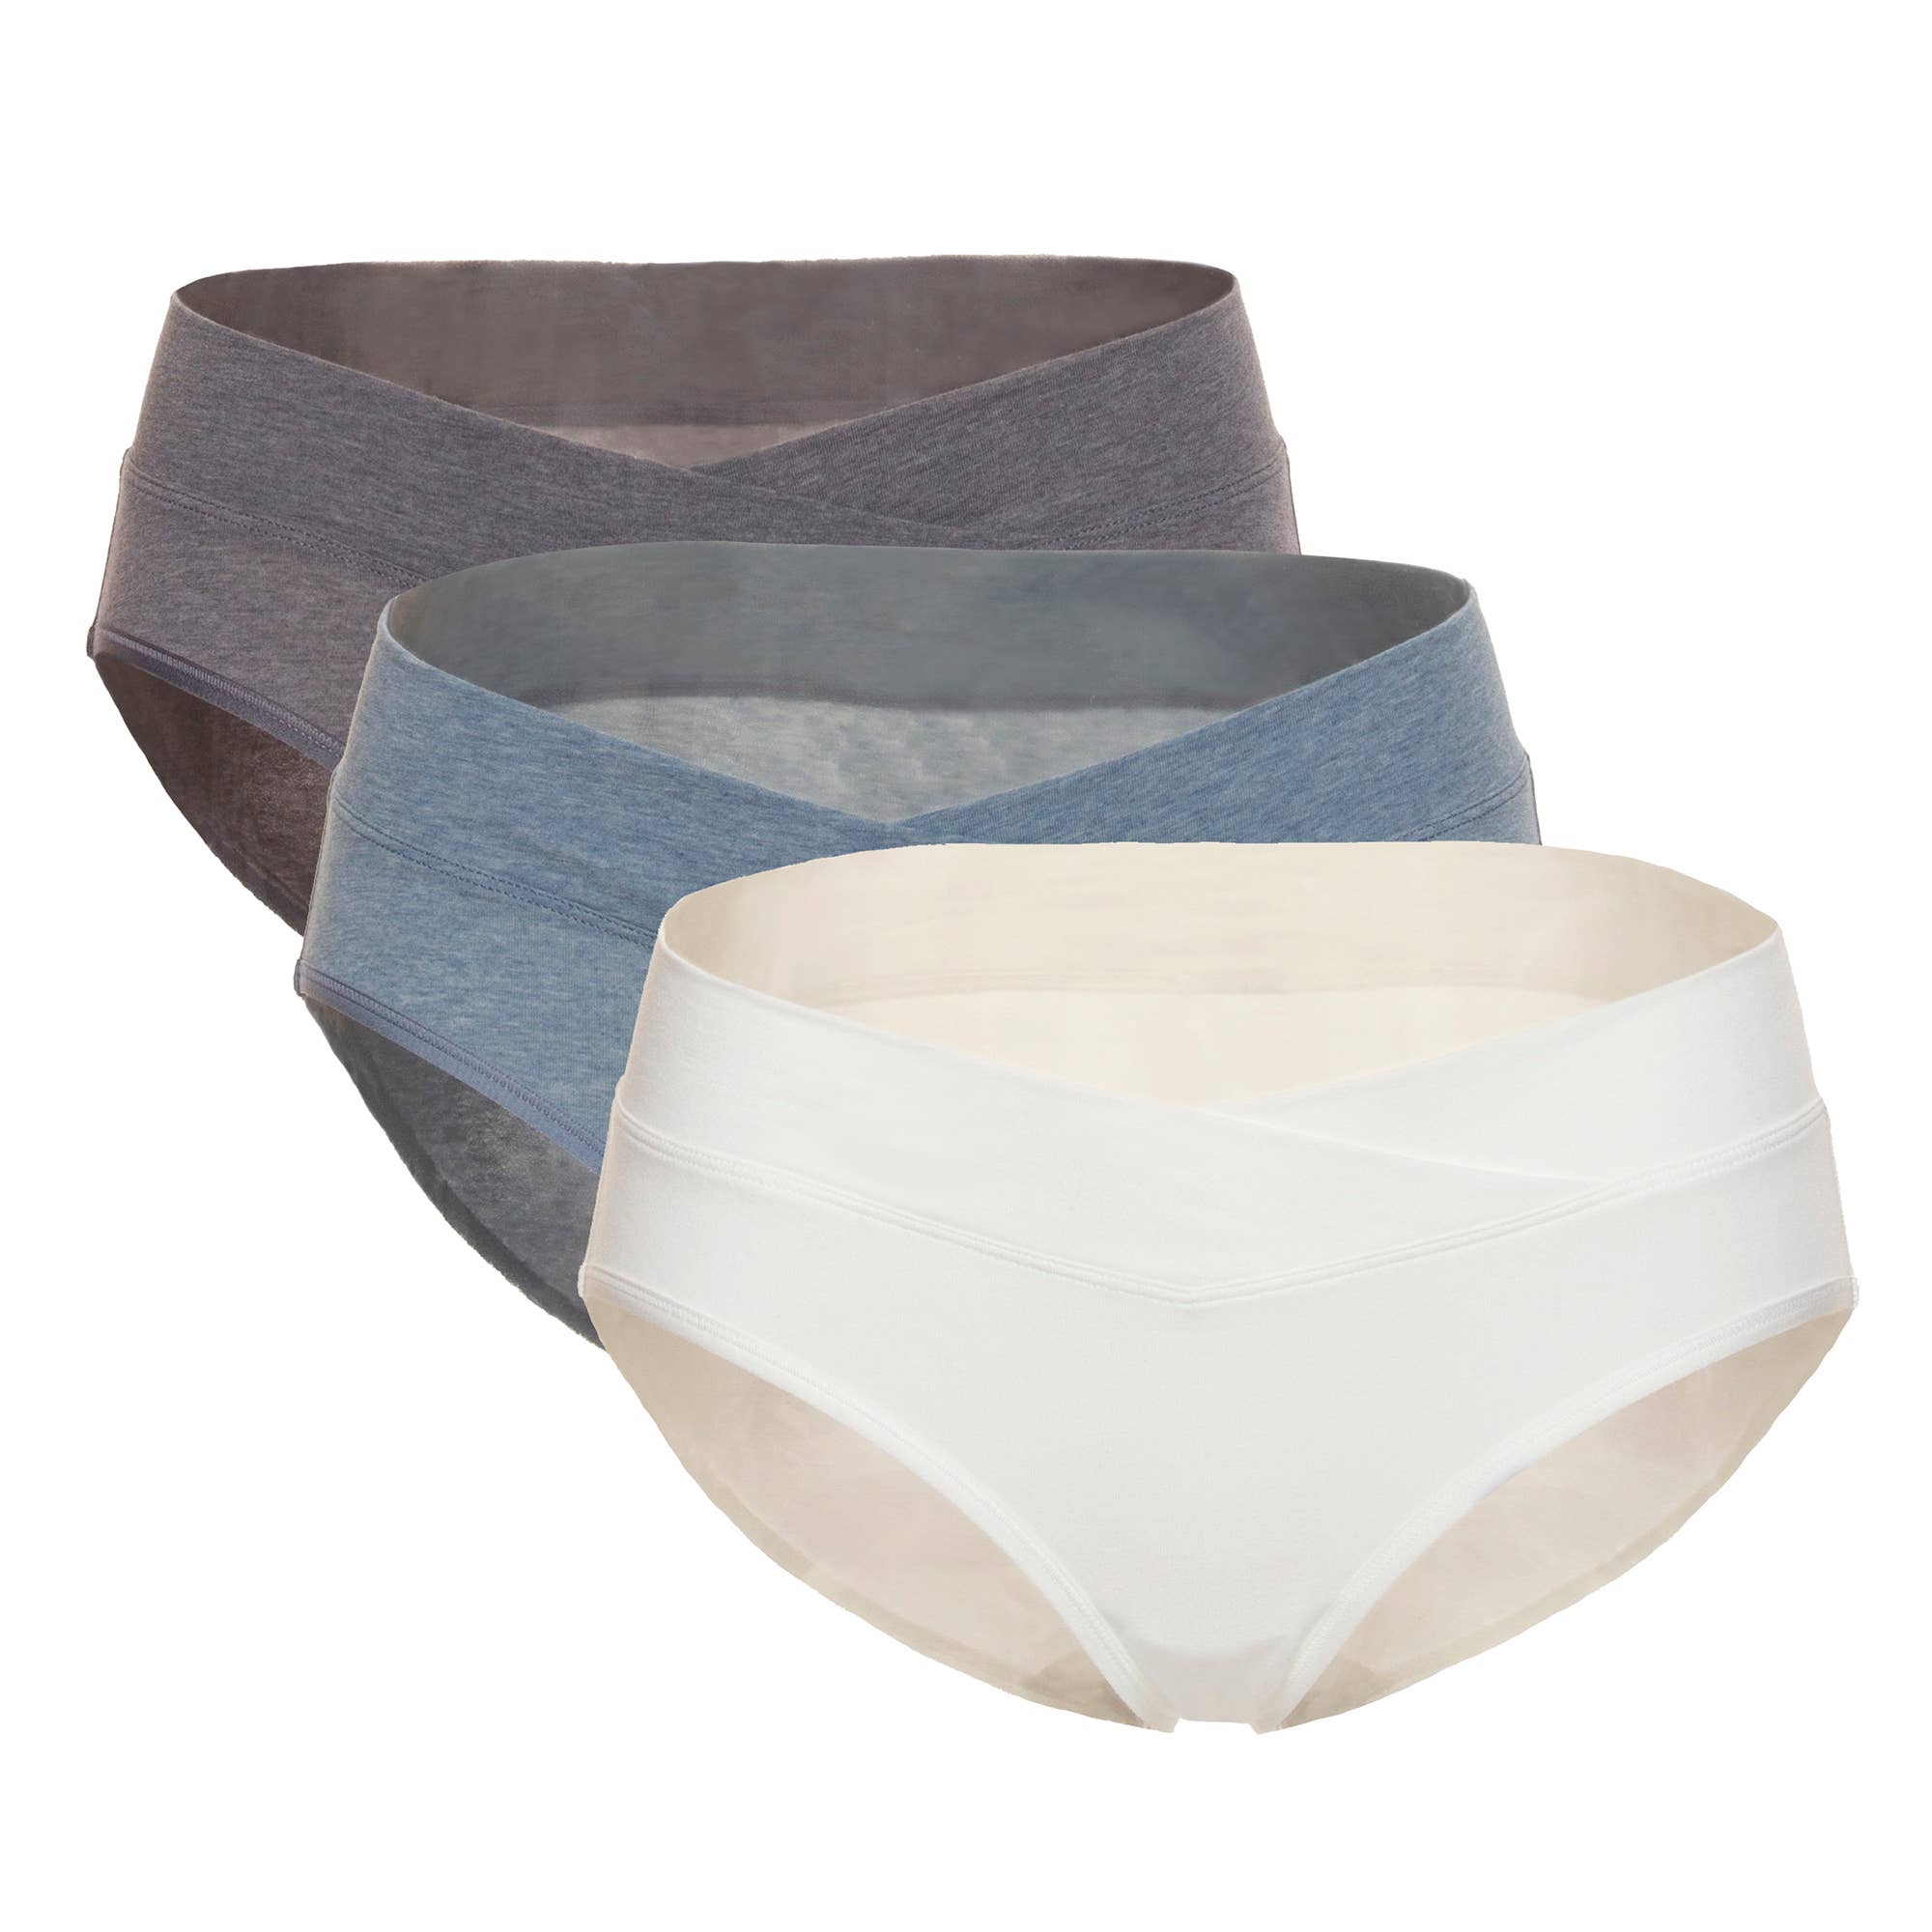 Organic Cotton Maternity Hipster Panty 3-Pack